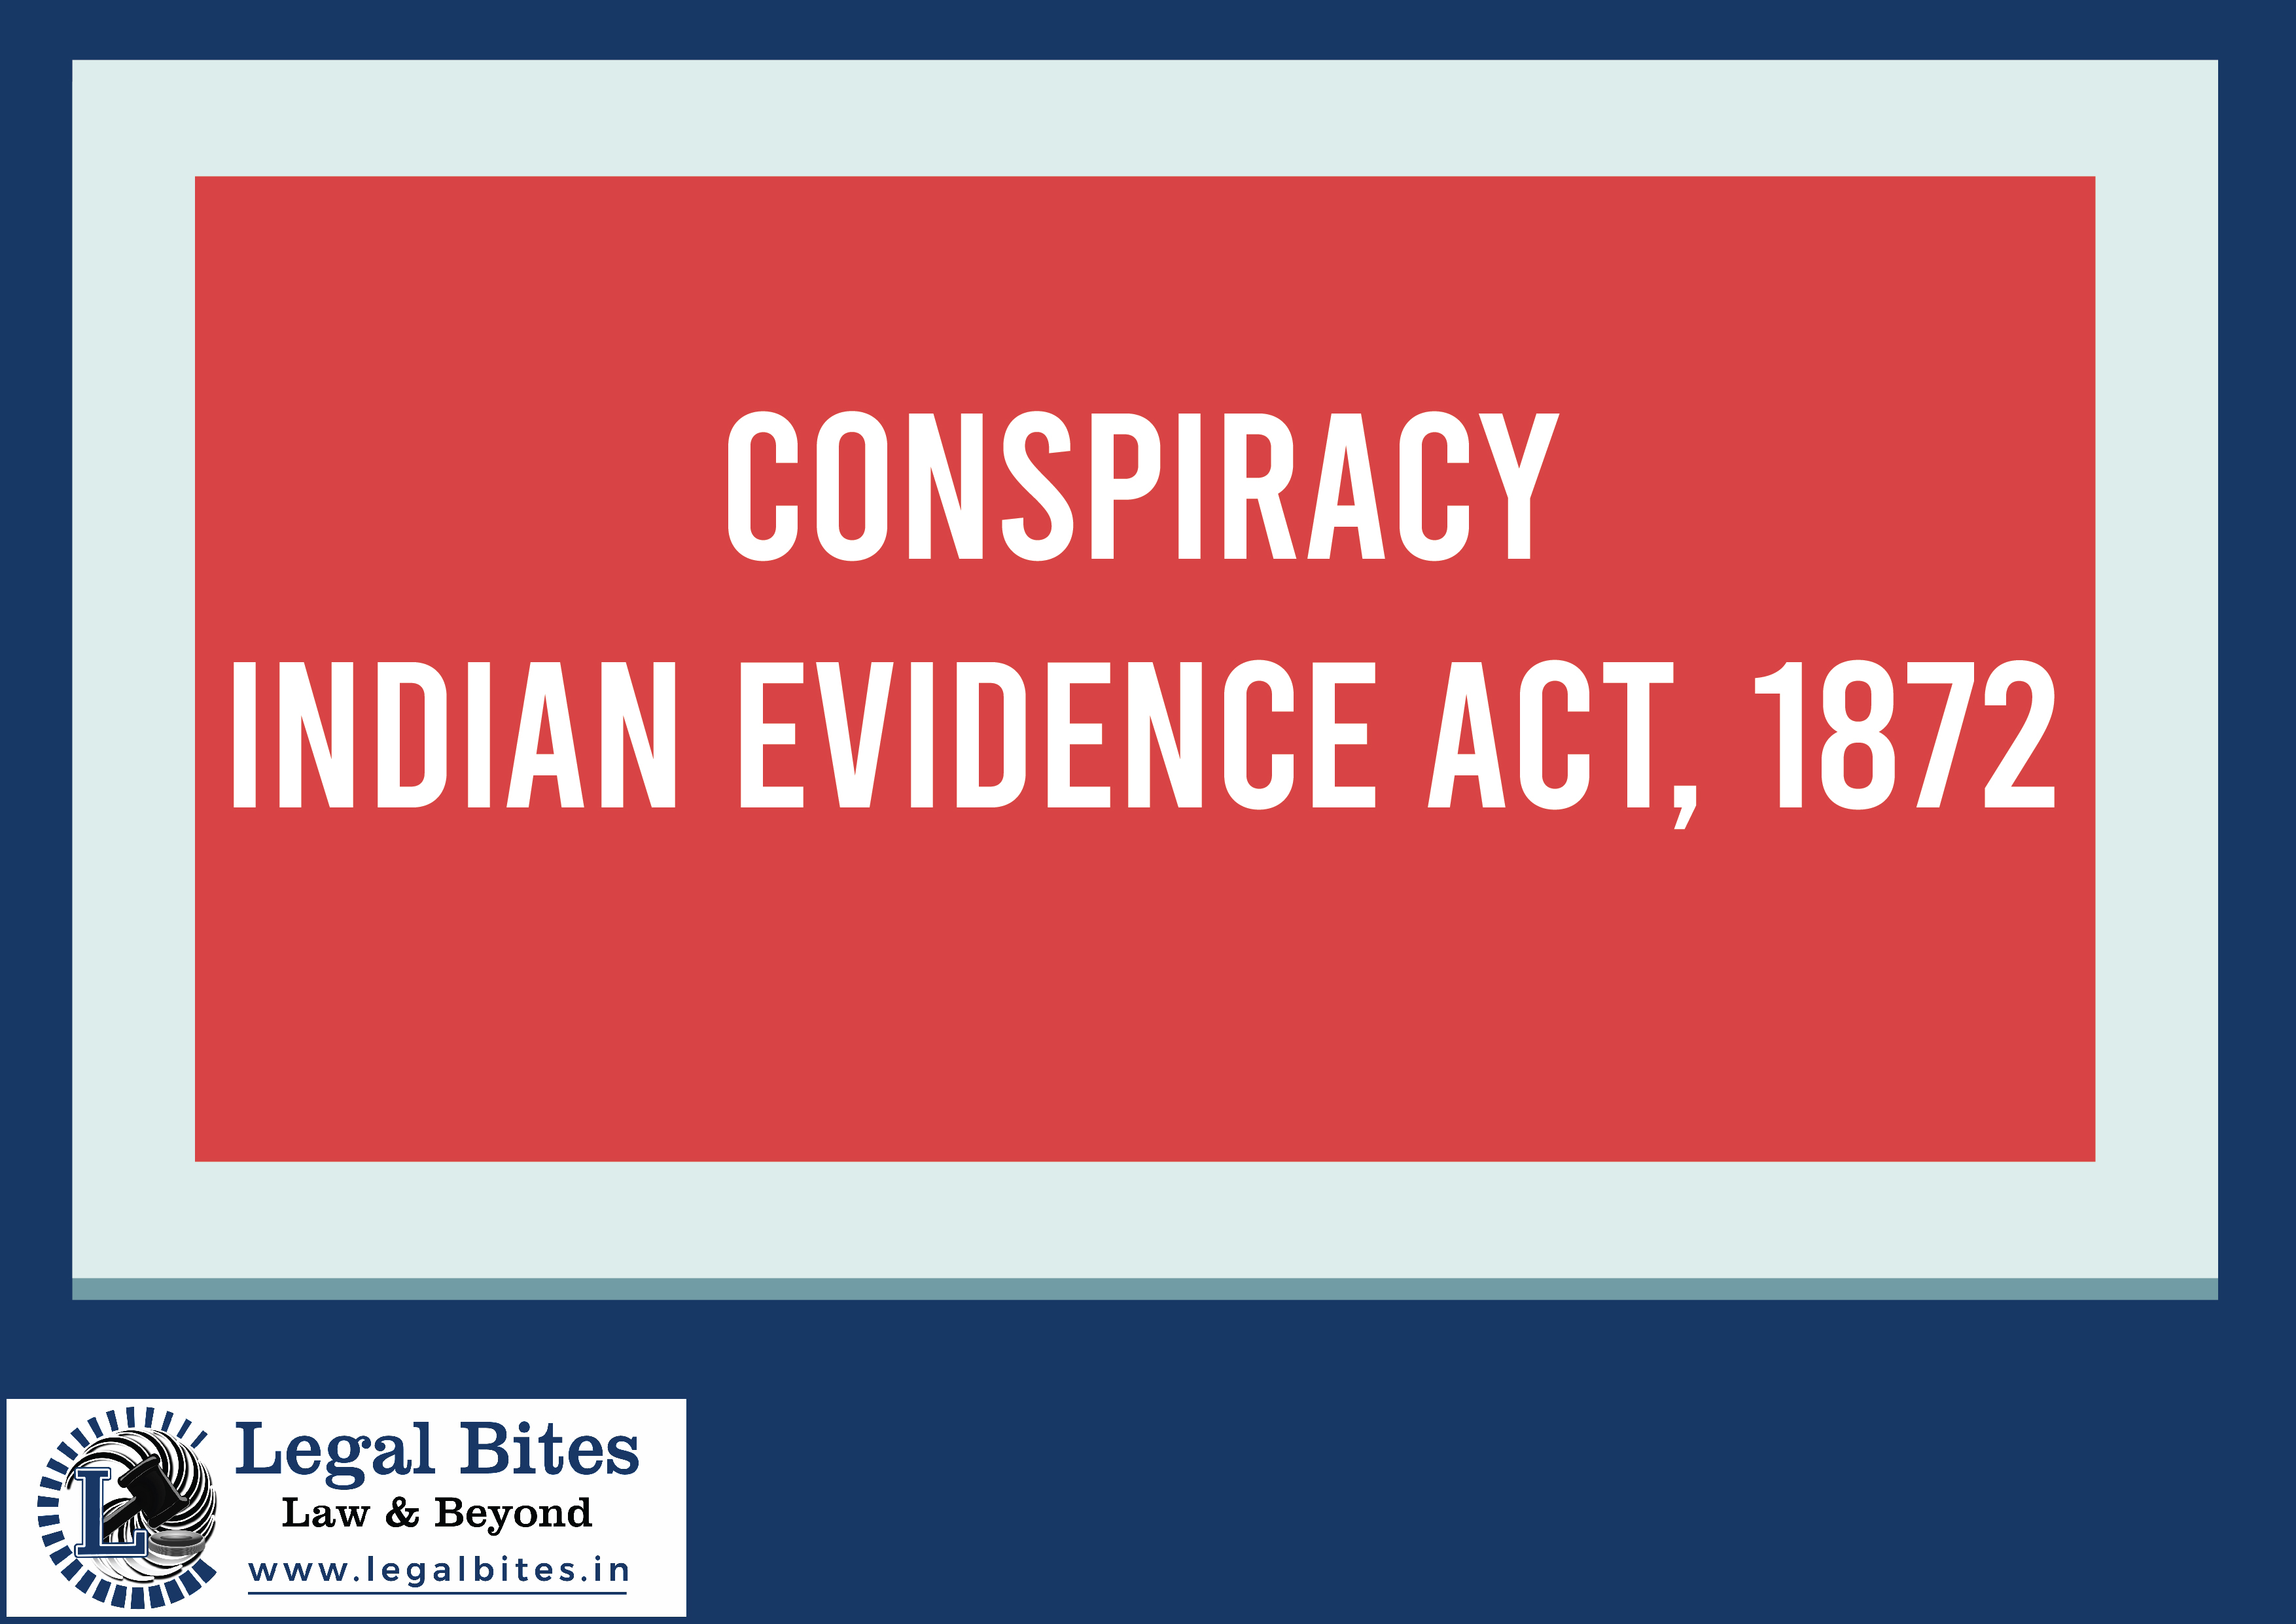 Conspiracy under the Indian Evidence Act, 1872